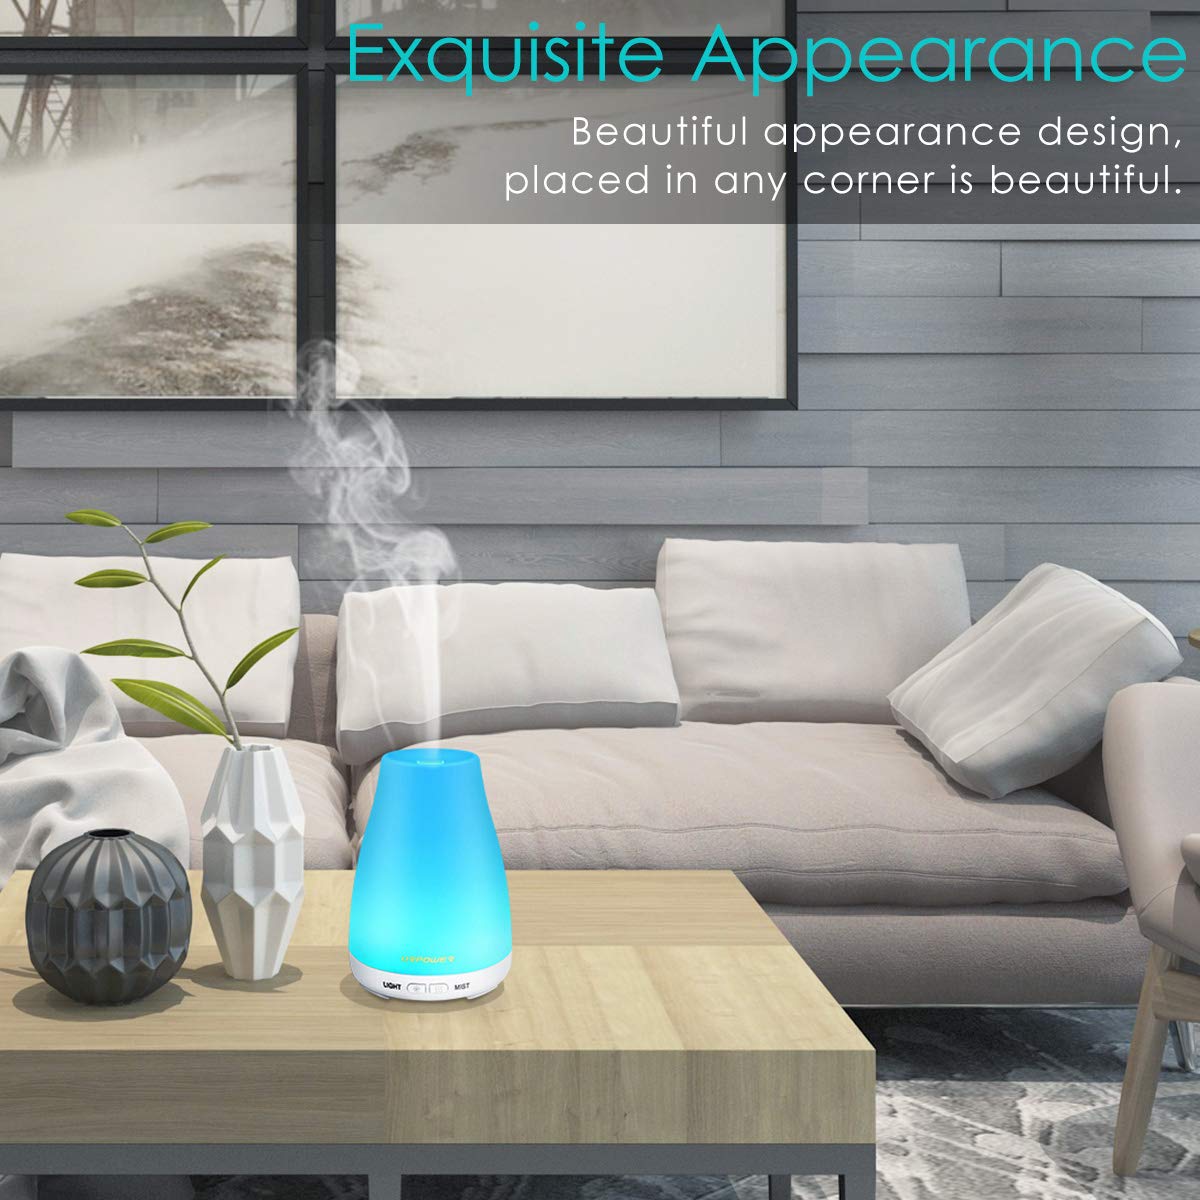 URPOWER Essential Oil Diffuser, 2 Pack Aromatherapy Diffuser for Essential Oils Portable Cool Mist Humidifier with Adjustable Mist Mode 7 Colors Lights and Waterless Auto Shut-Off for Home Office